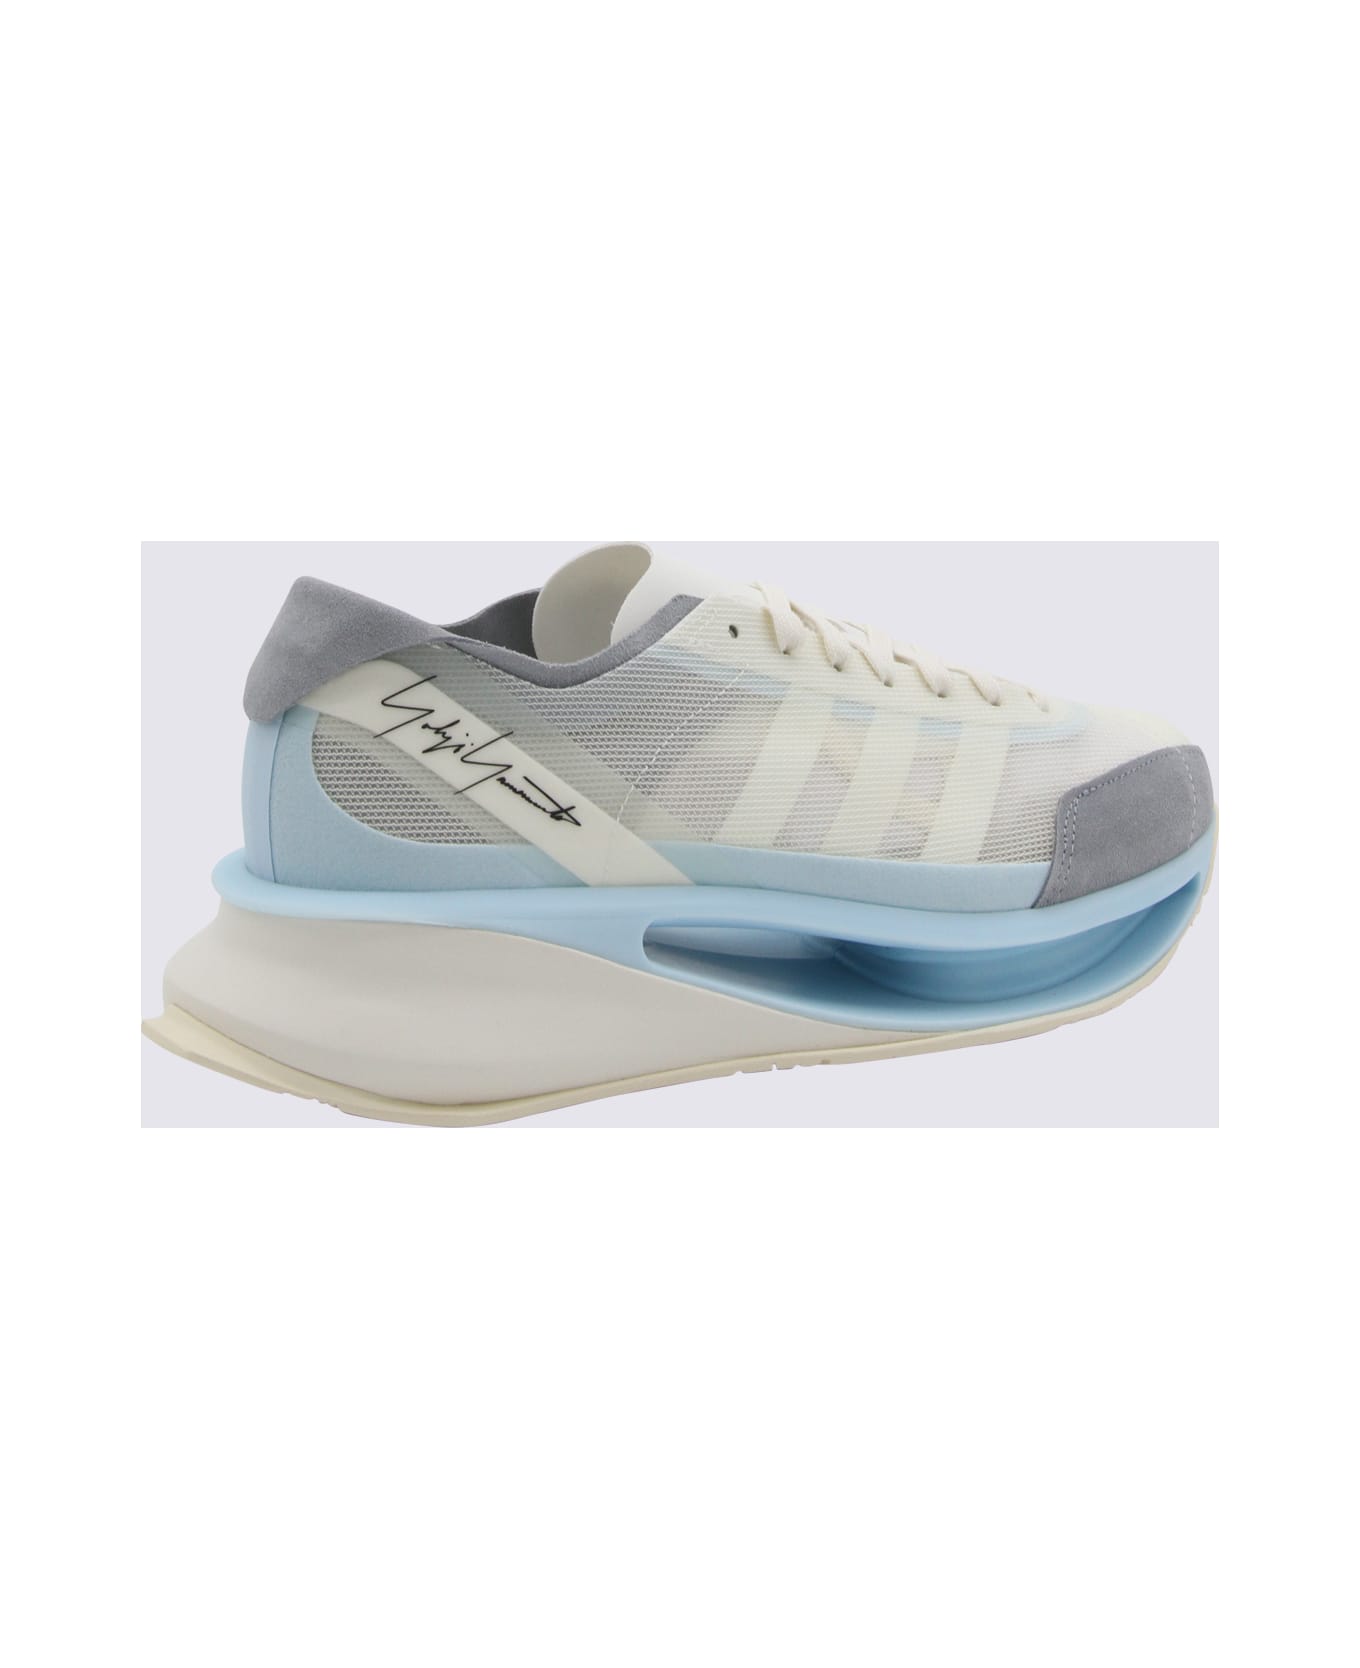 Y-3 Off White Sneakers - OFF WHITE/CREAM WHITE/ICE BLUE